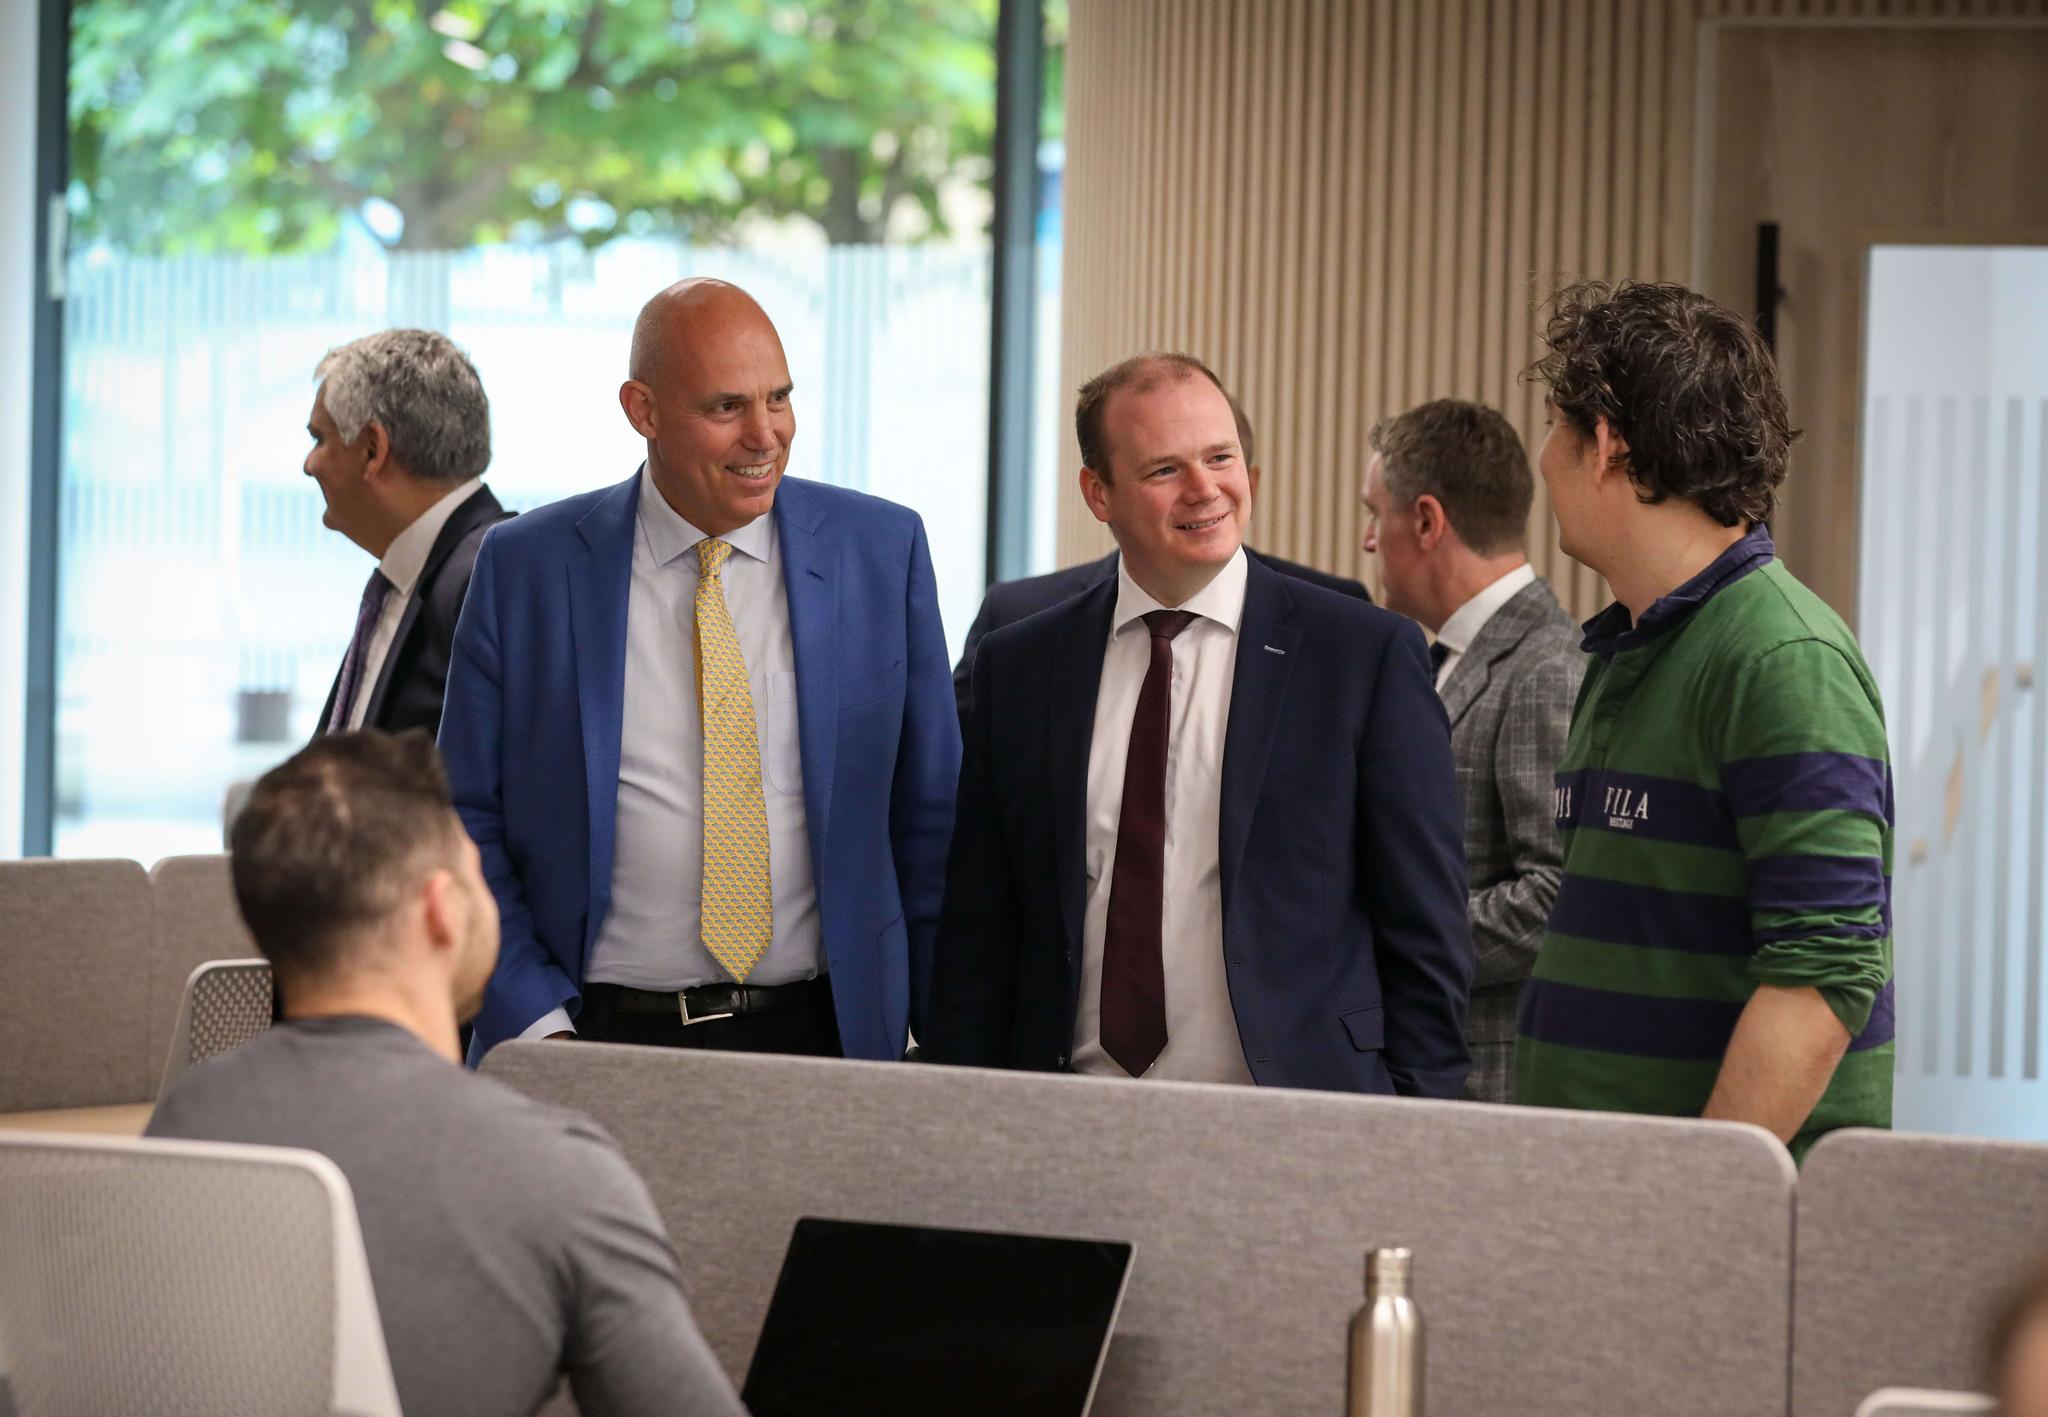 The Northern Ireland Finance Minister (center) visiting the TBOL NI Office and talking with COO Jim (left) and Senior Software Engineer Pieter (right)